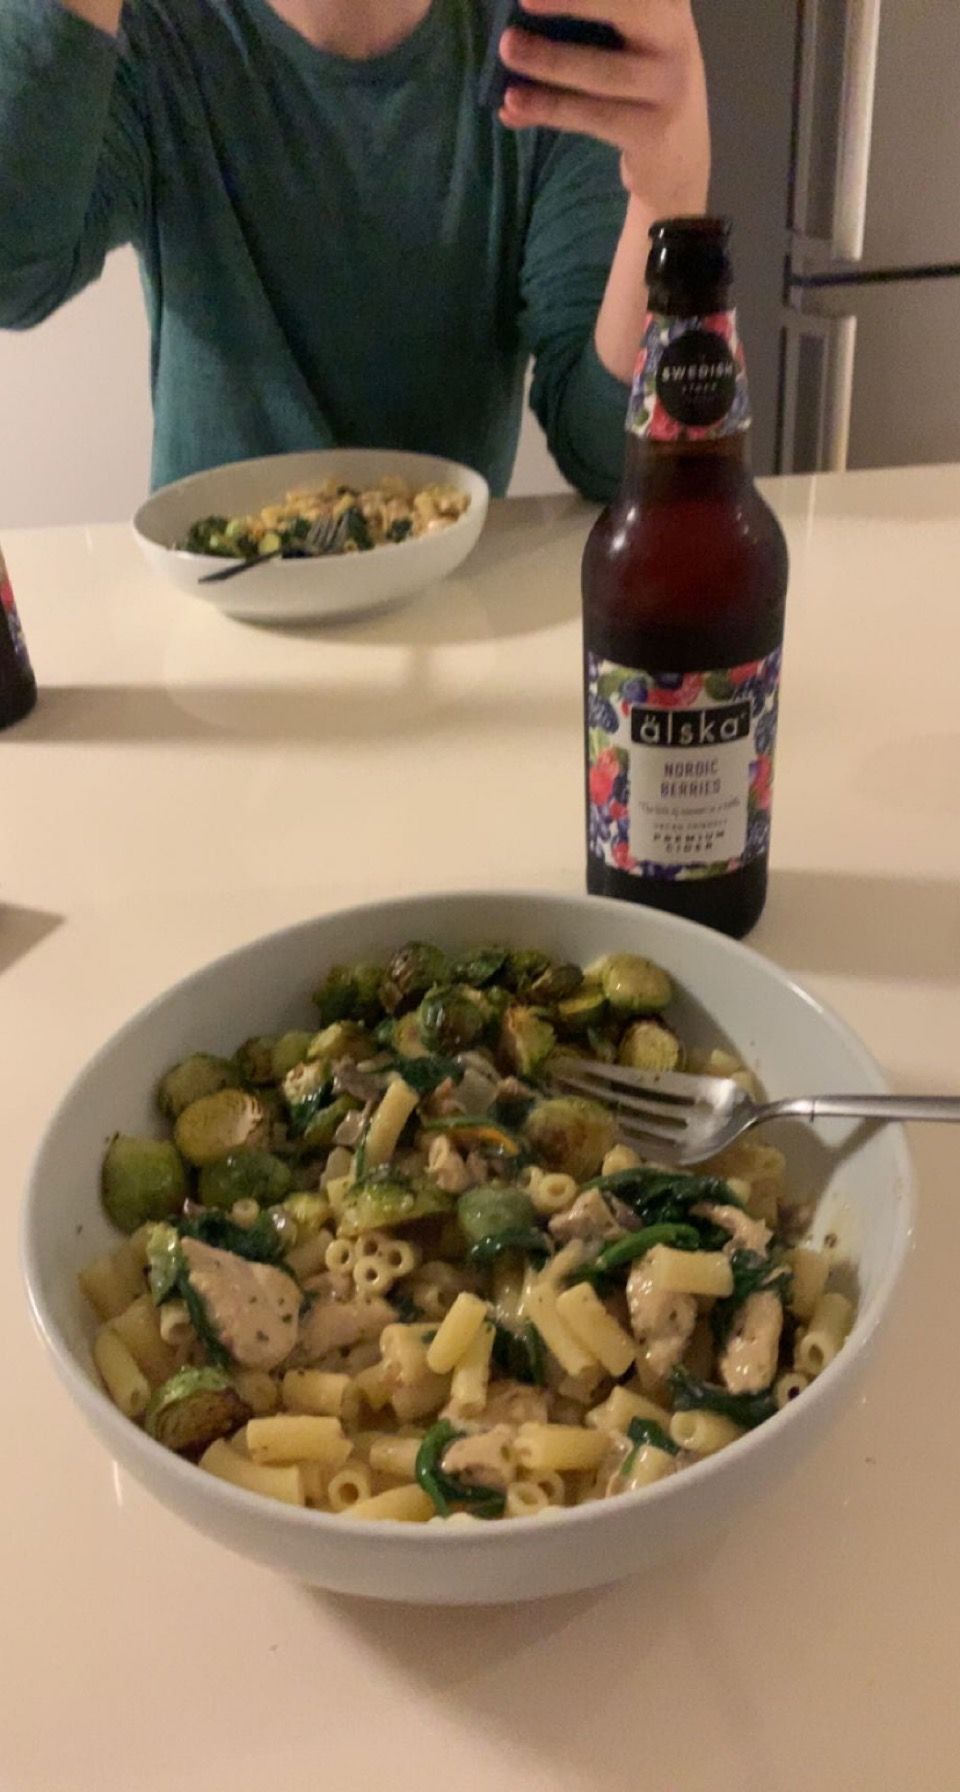 A meal of pasta with green vegetables and chicken